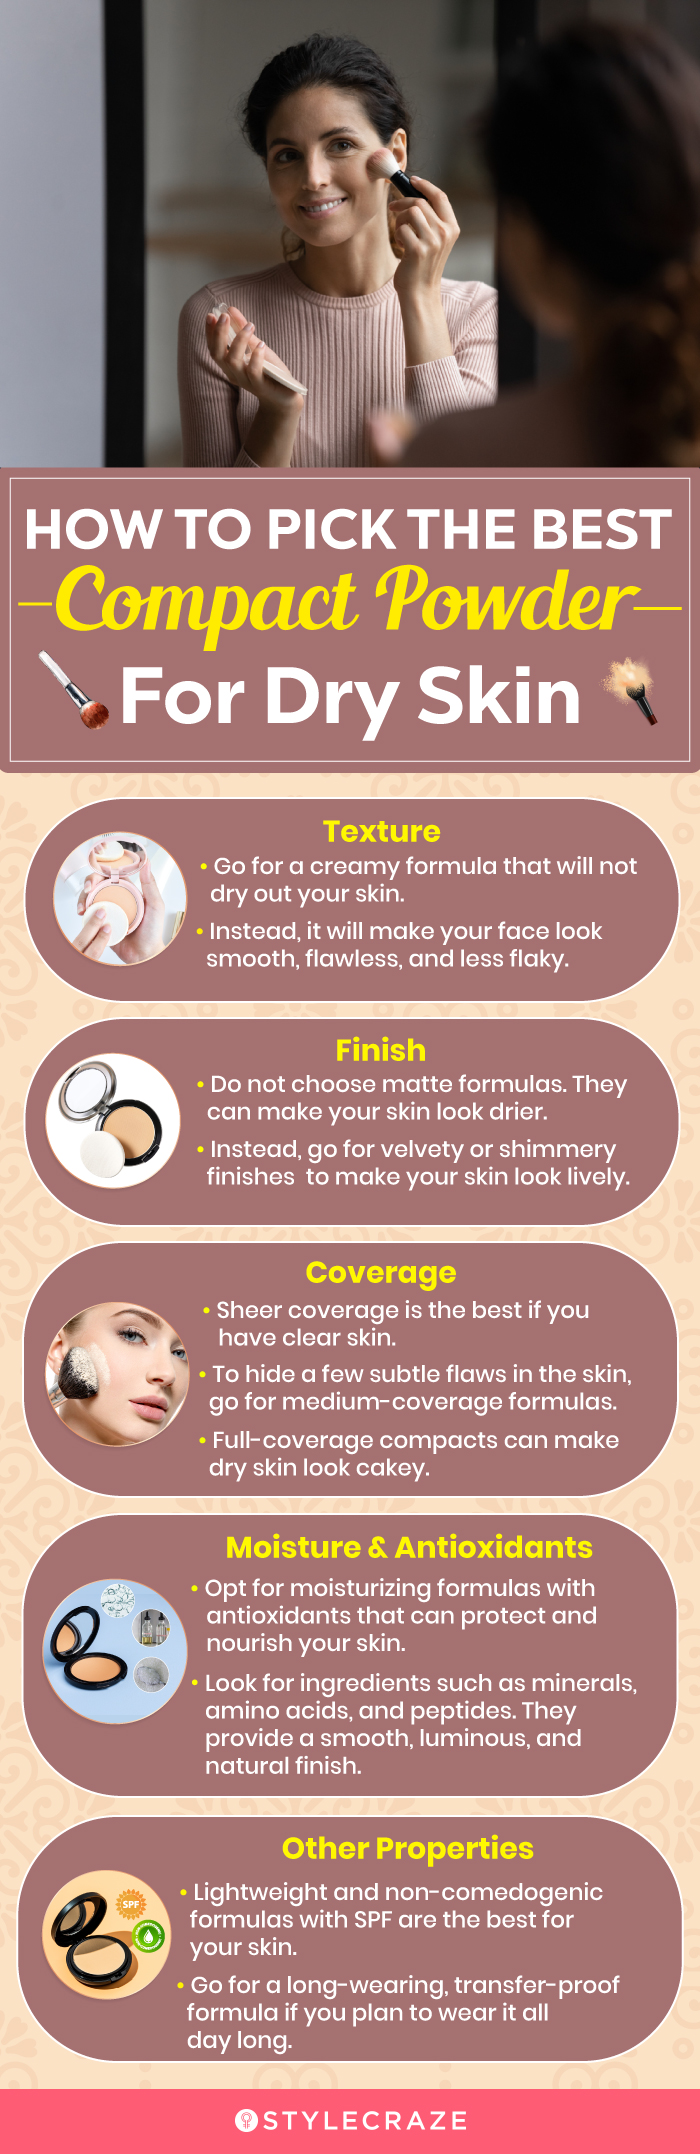 How To Pick The Best Compact Powder For Dry Skin (infographic)